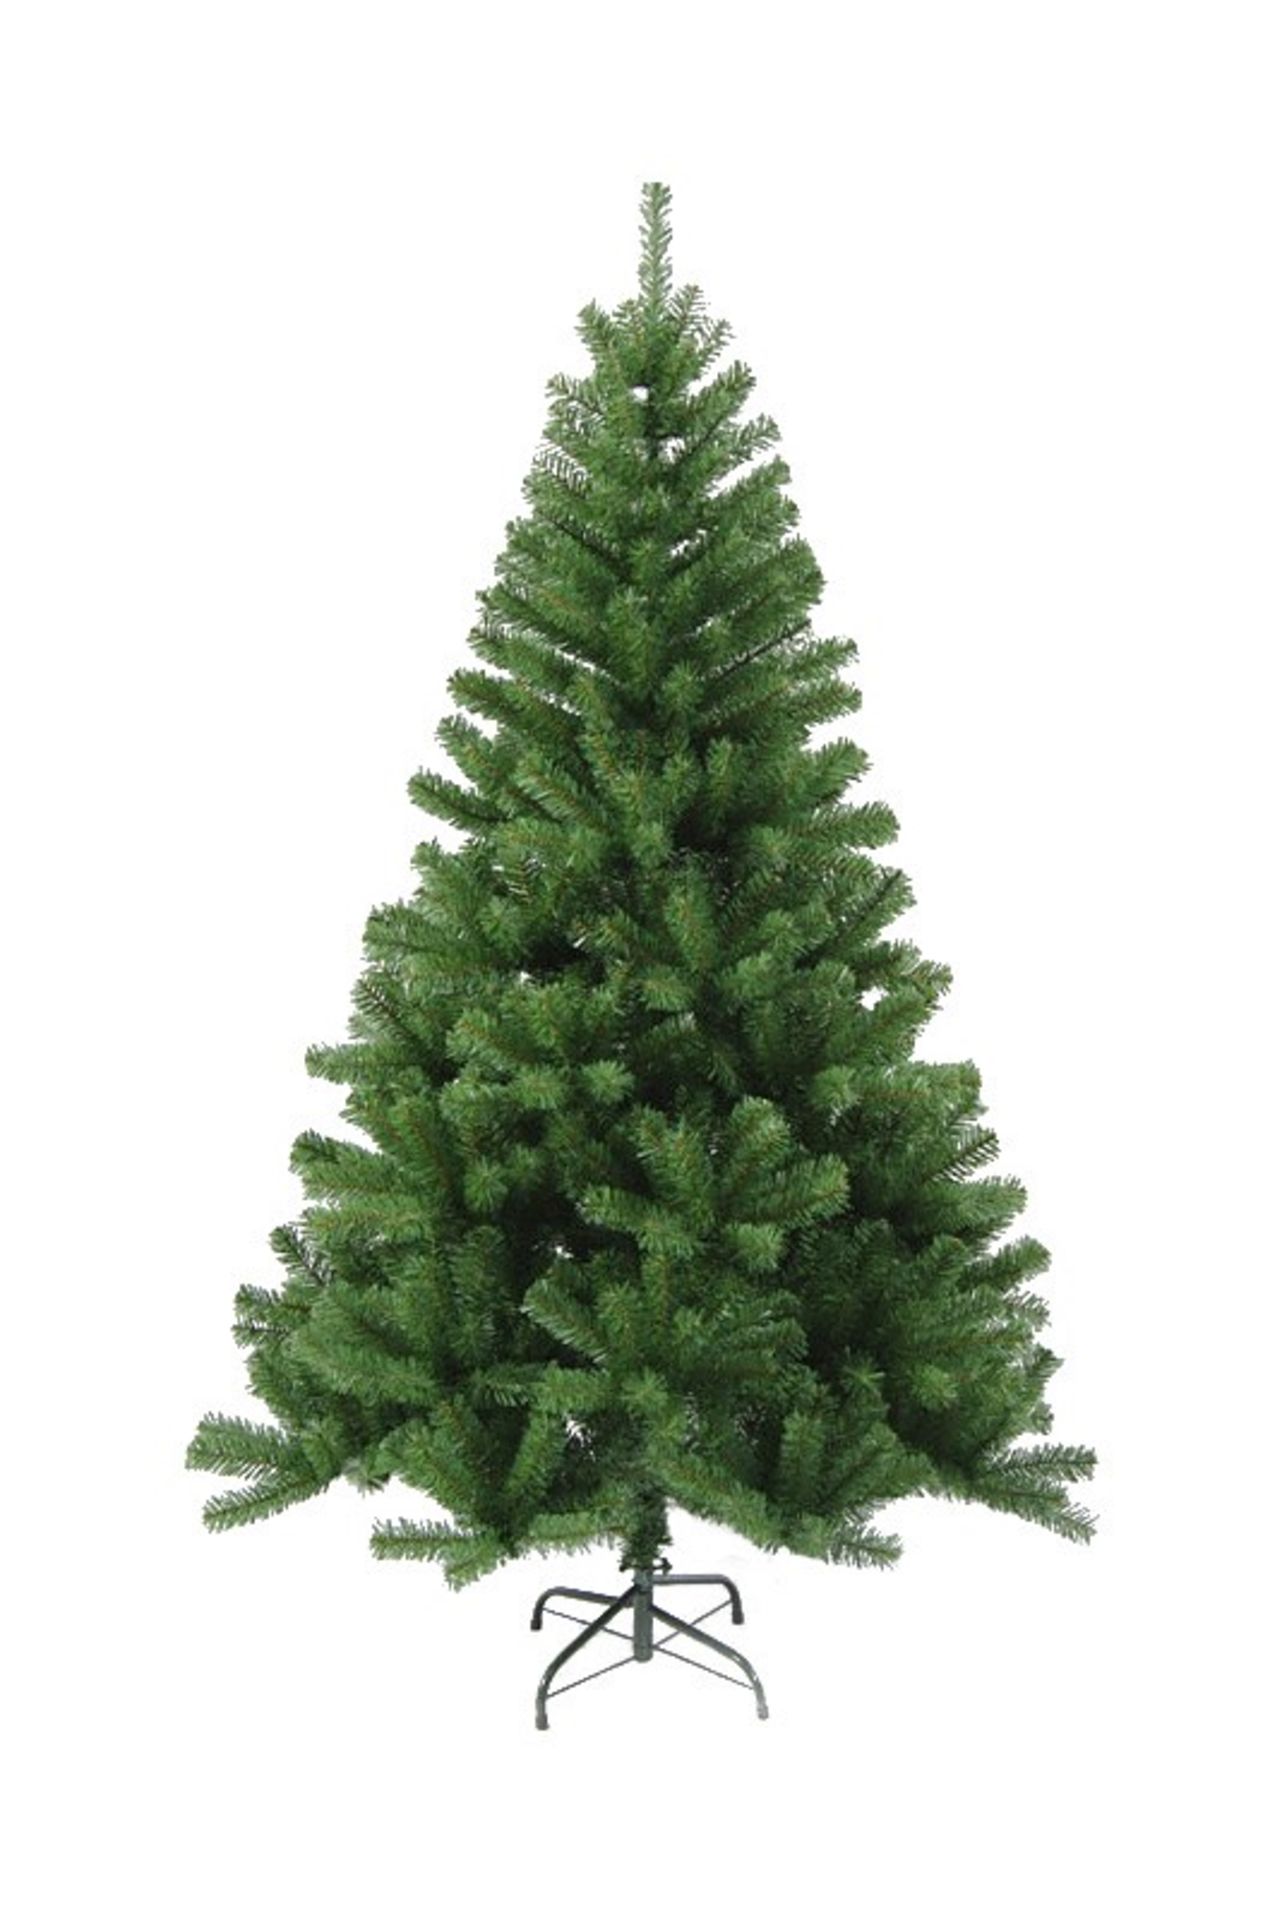 + VAT Brand New "Noel" Luxury 6ft Classic Spruce Christmas Tree - Complete With Metal Base/Stand